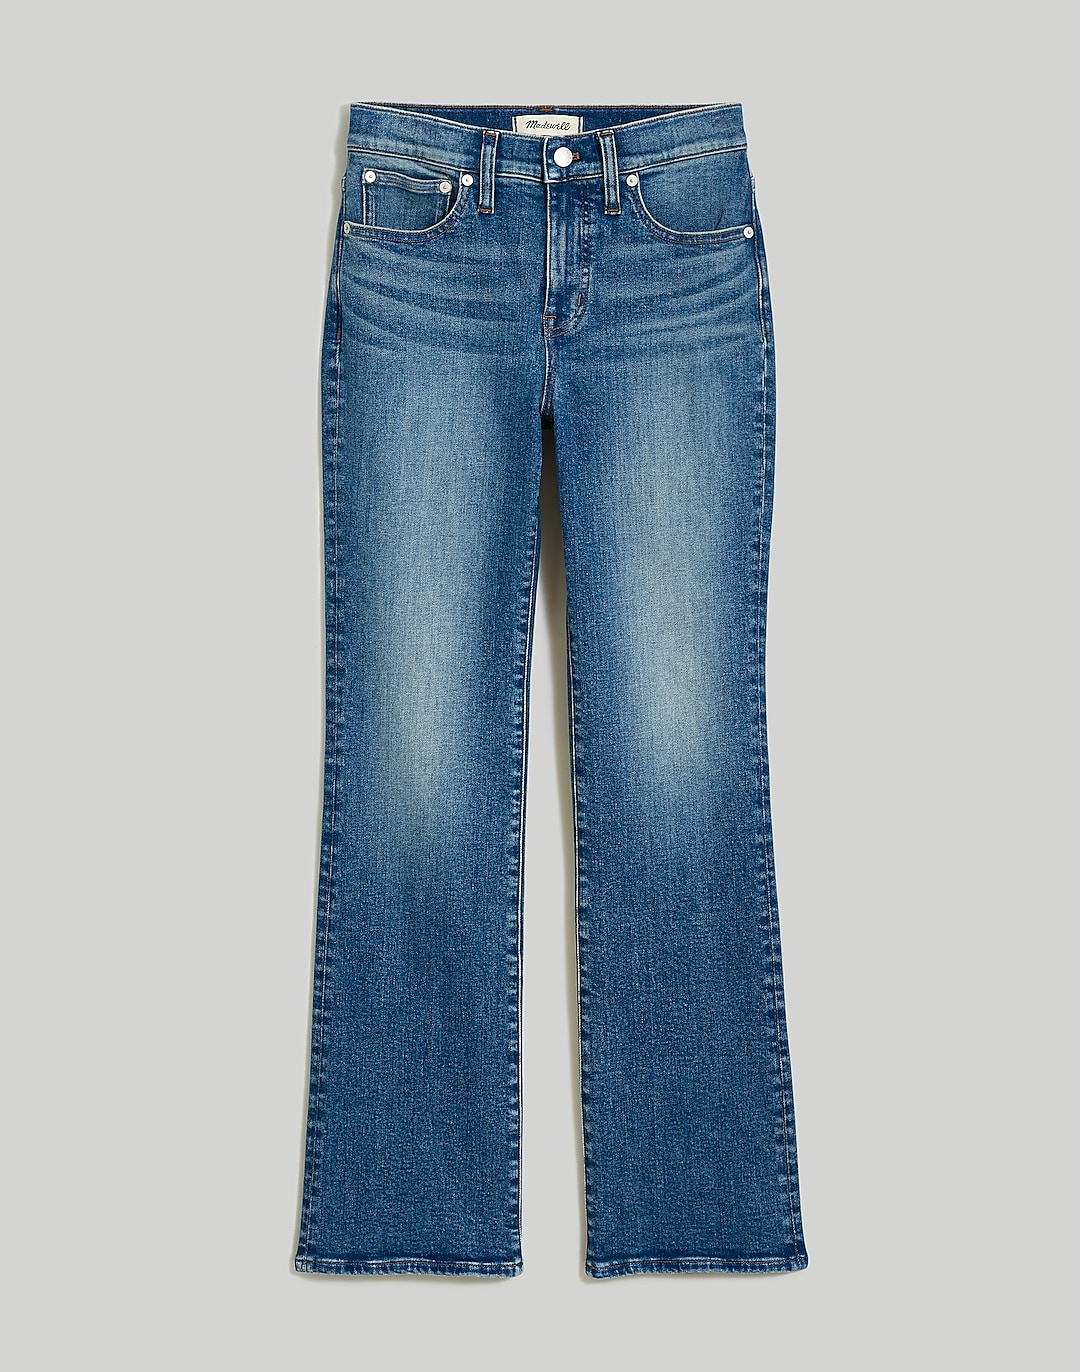 Kick Out Crop Jeans in Oneida Wash | Madewell